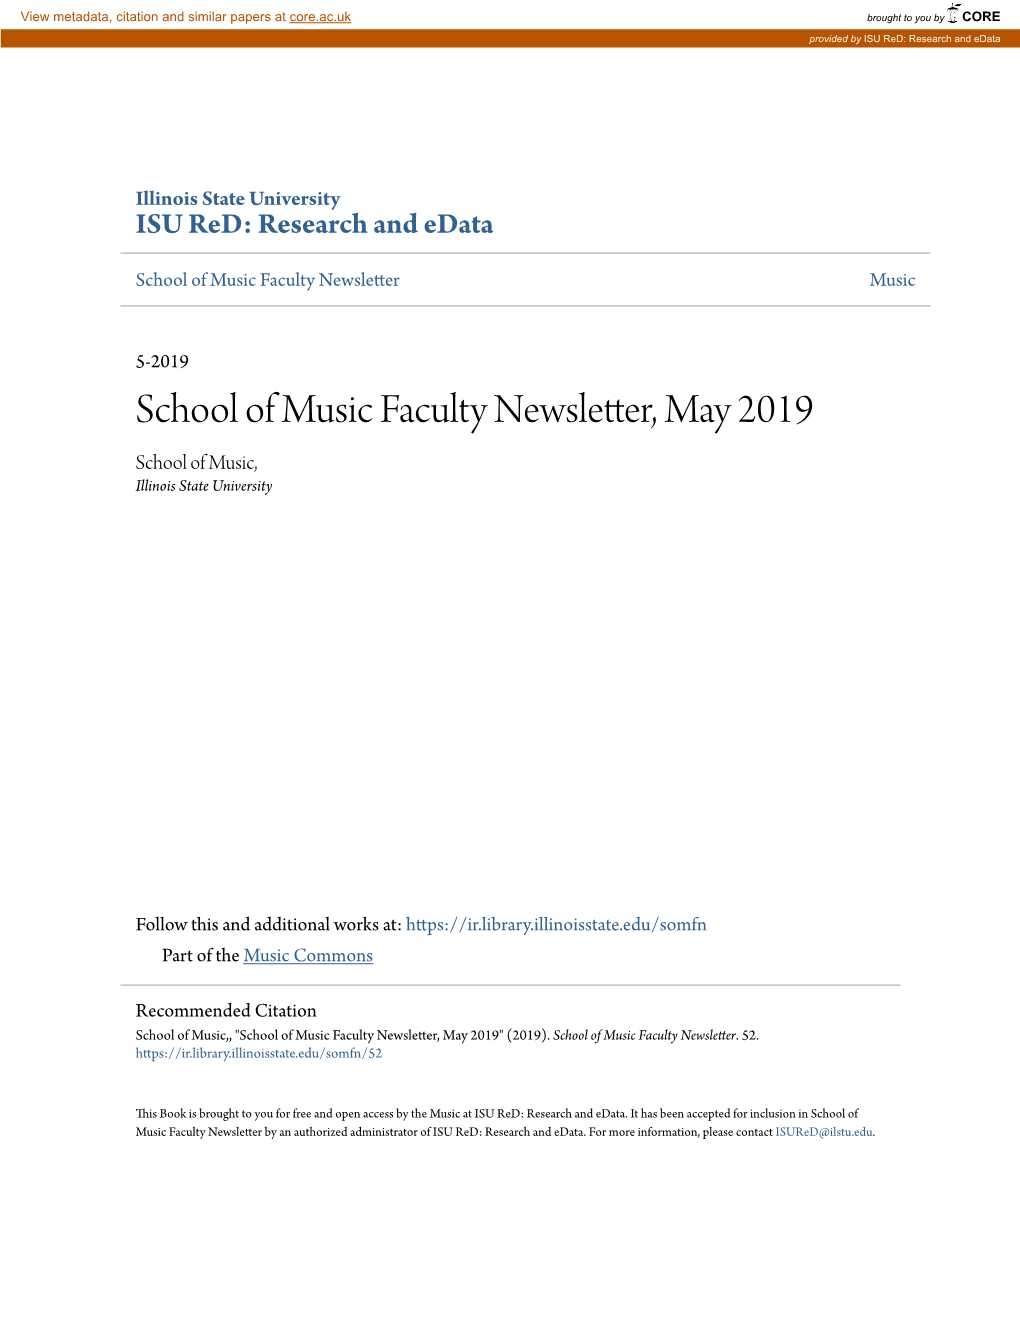 School of Music Faculty Newsletter, May 2019 School of Music, Illinois State University